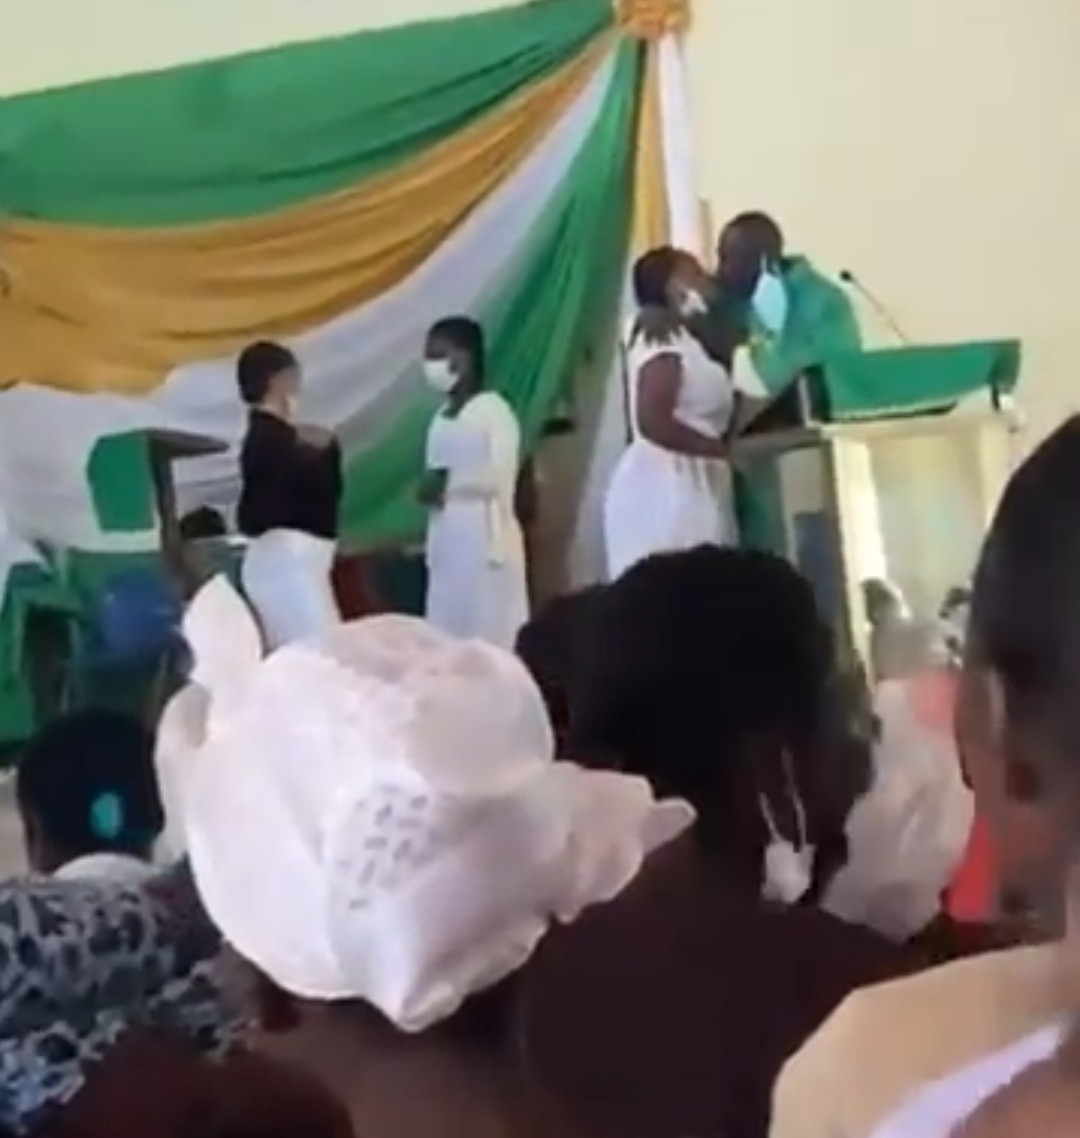 Anglican Church Releases Statement On Video Of Priest Kissing Female Students